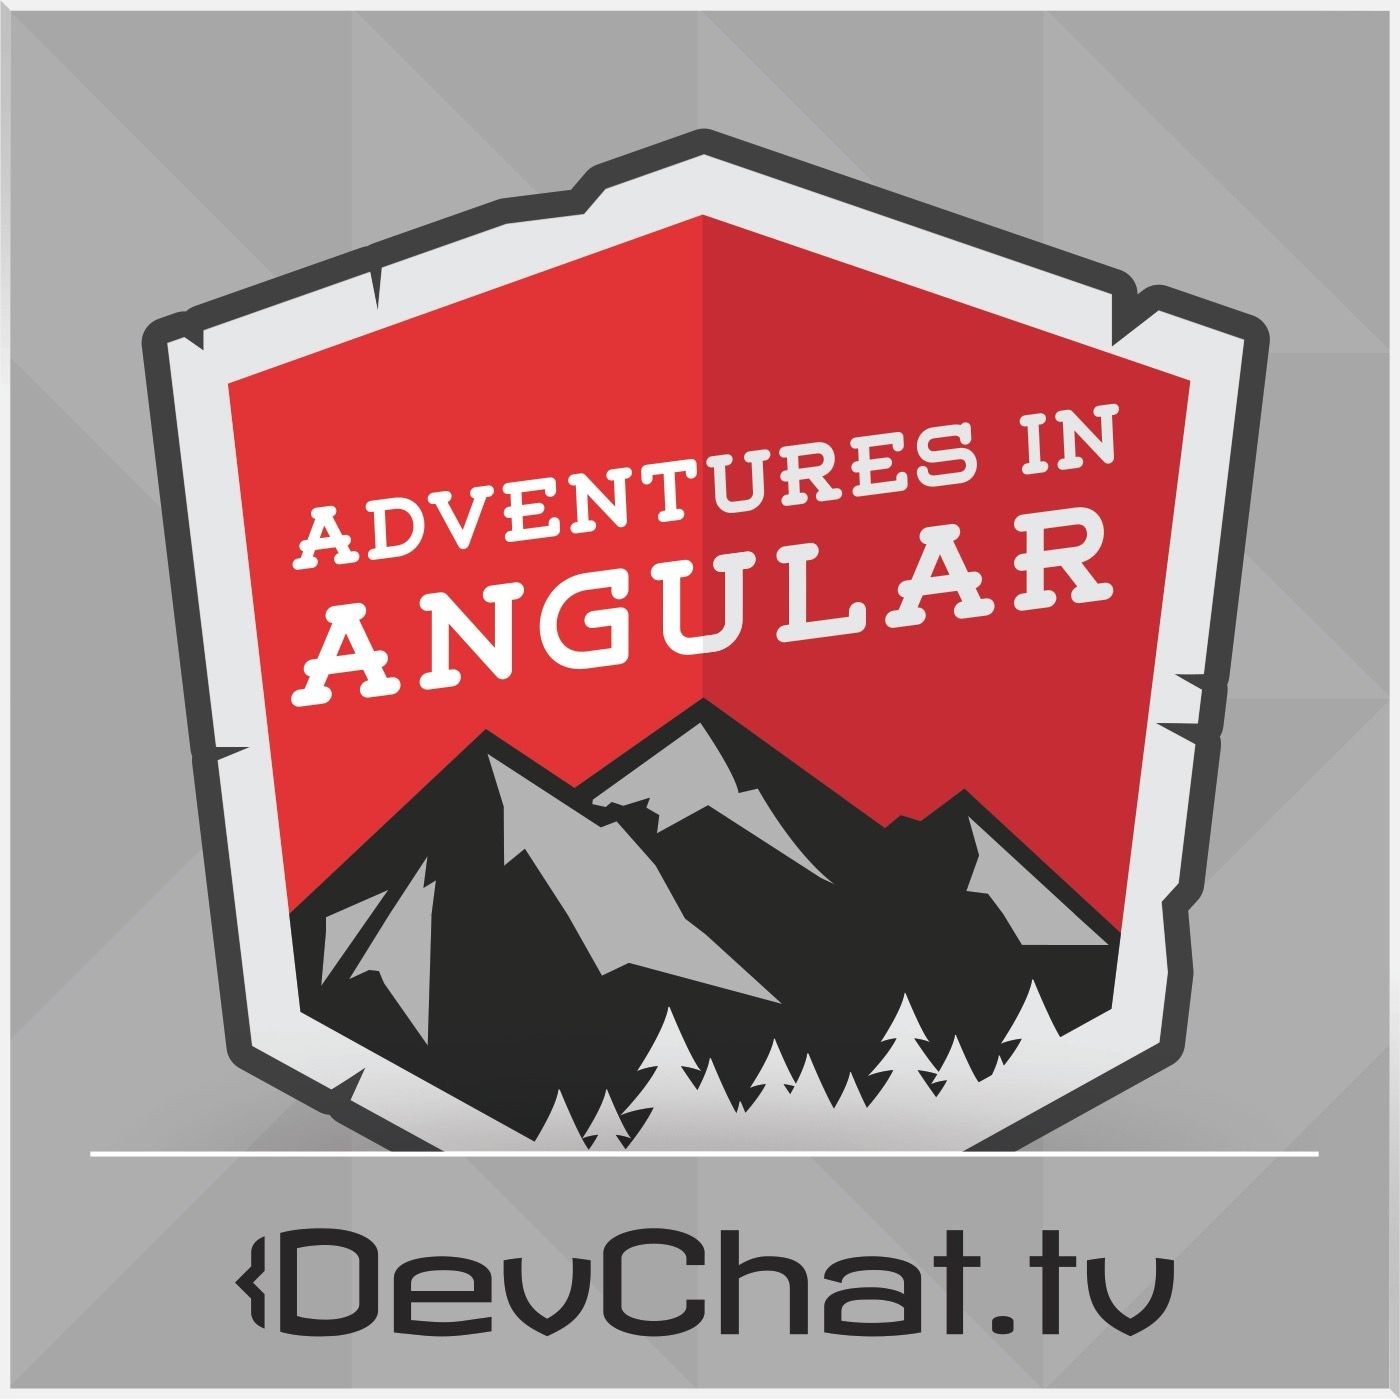 The Easiest Way to use Angular Elements with Tomas Trajan - AIA 413